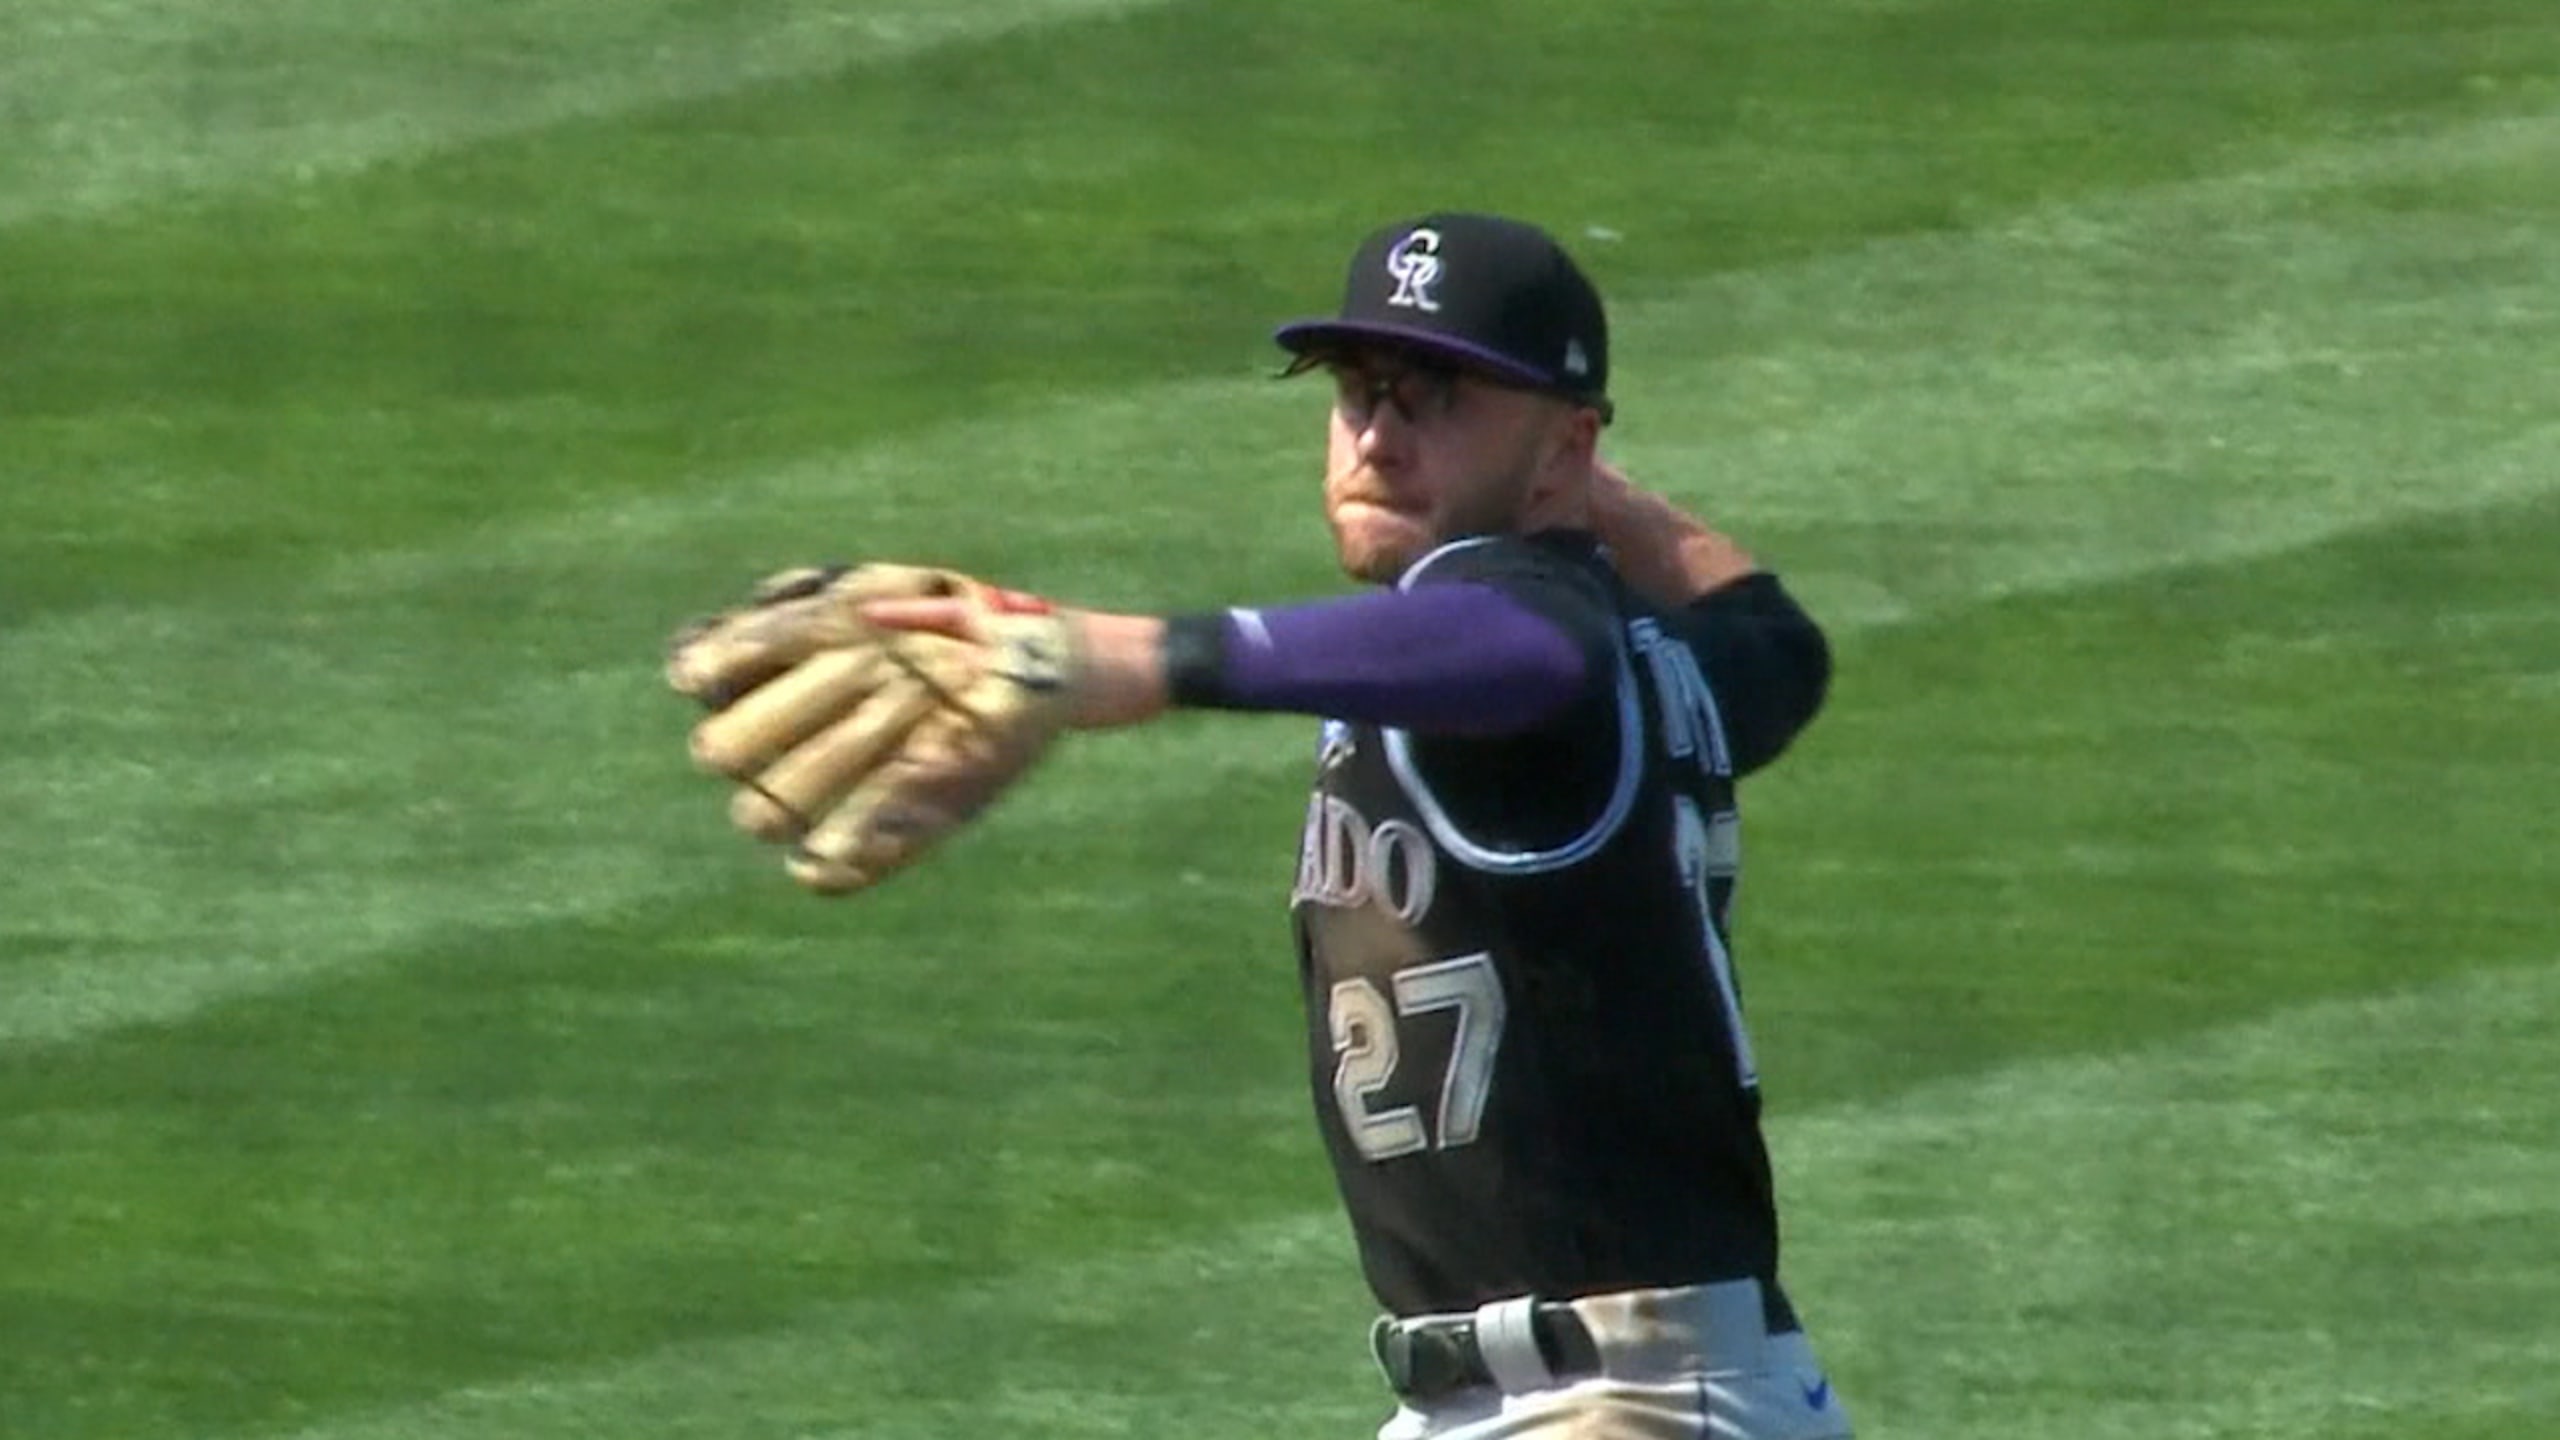 Trevor Story has elbow surgery, will miss time - Lone Star Ball